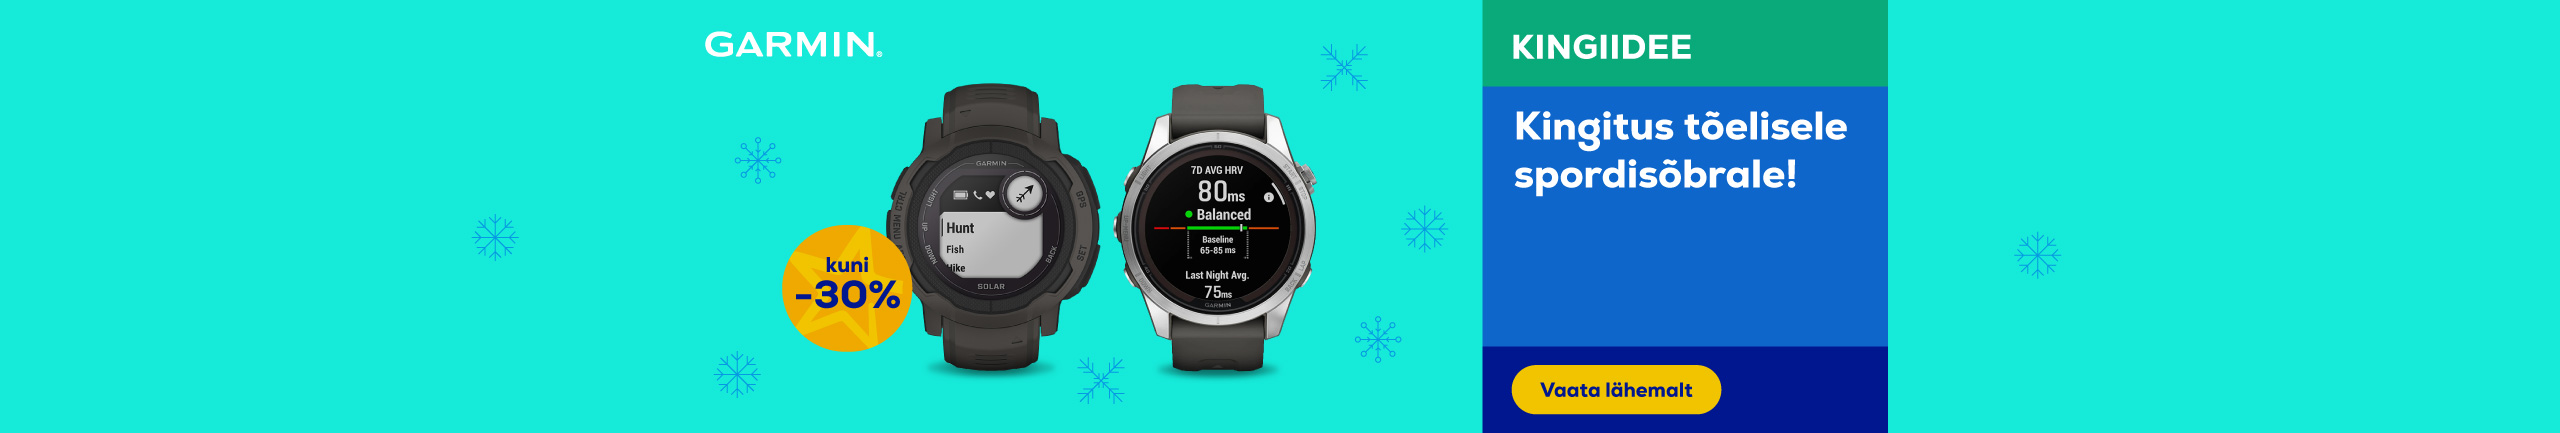 Garmin - great gift for a true sportslover!